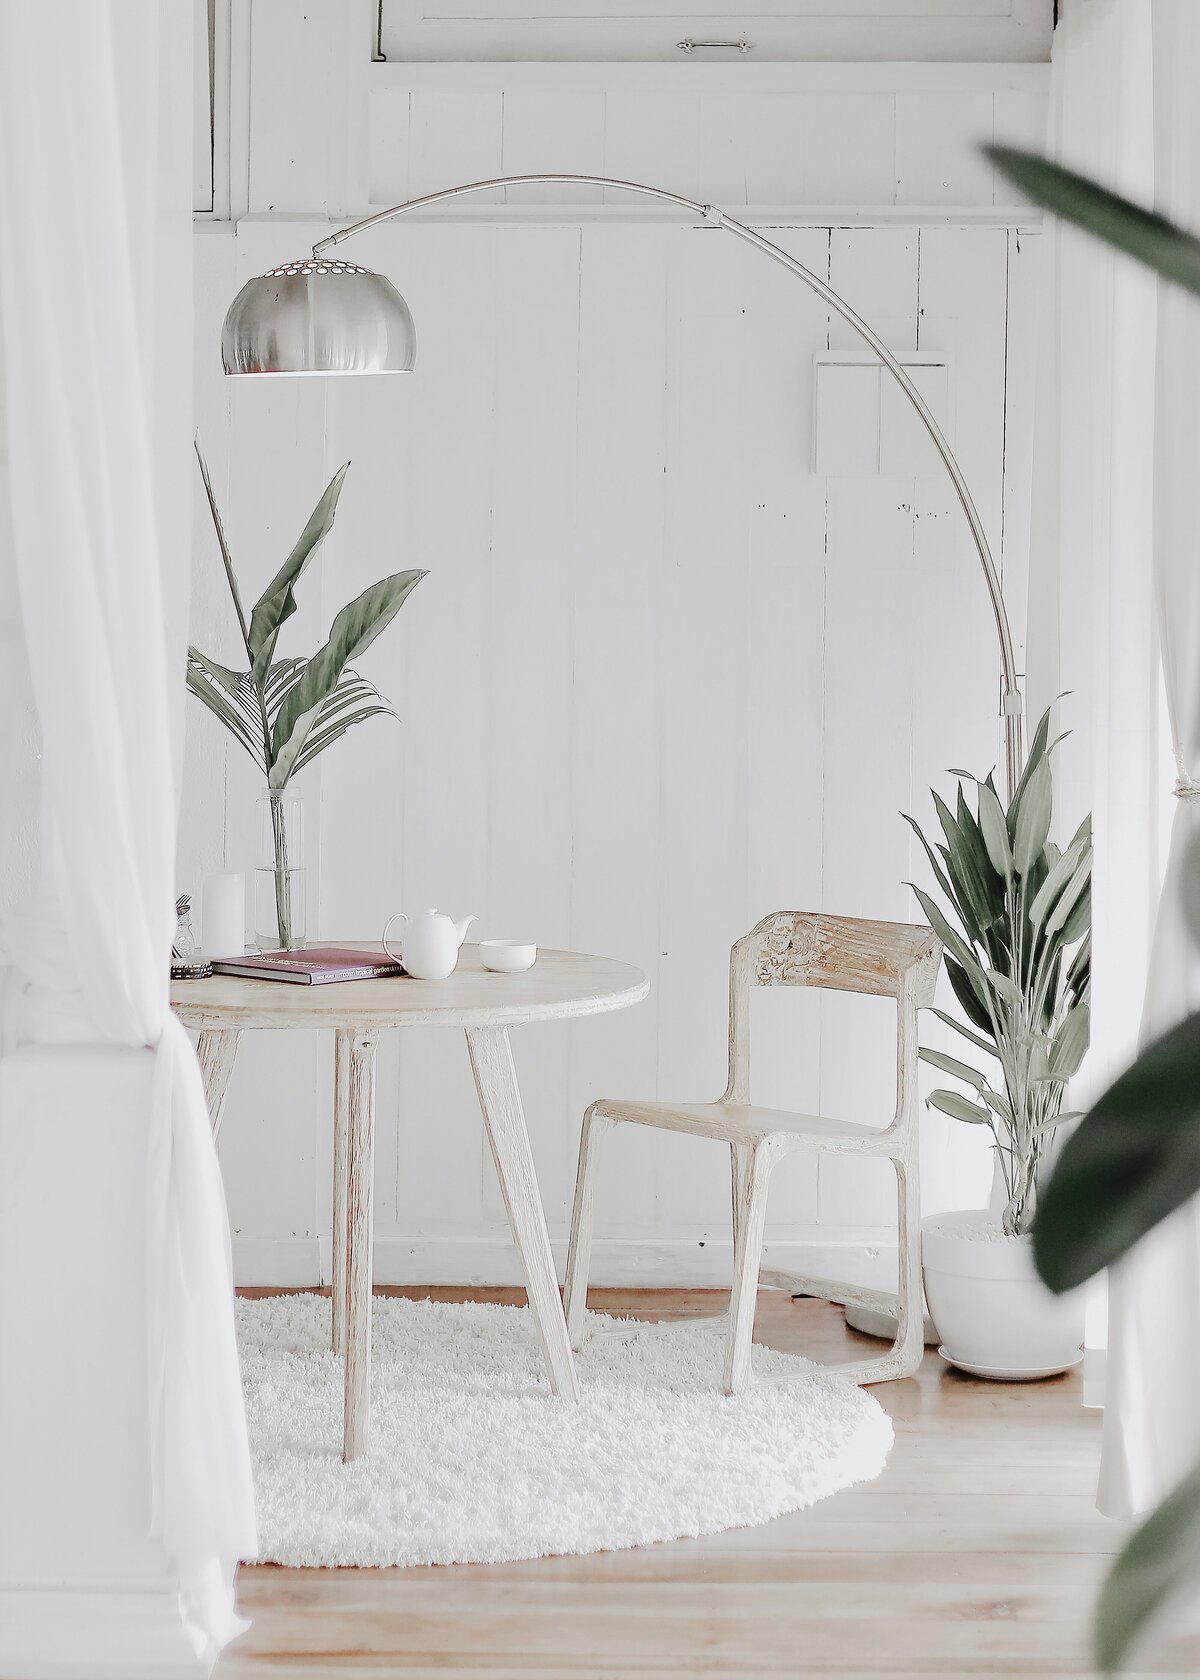 A white washed wooden wall is pictured in a corner with boho distressed table and chair with plants and a metal floor lamp.